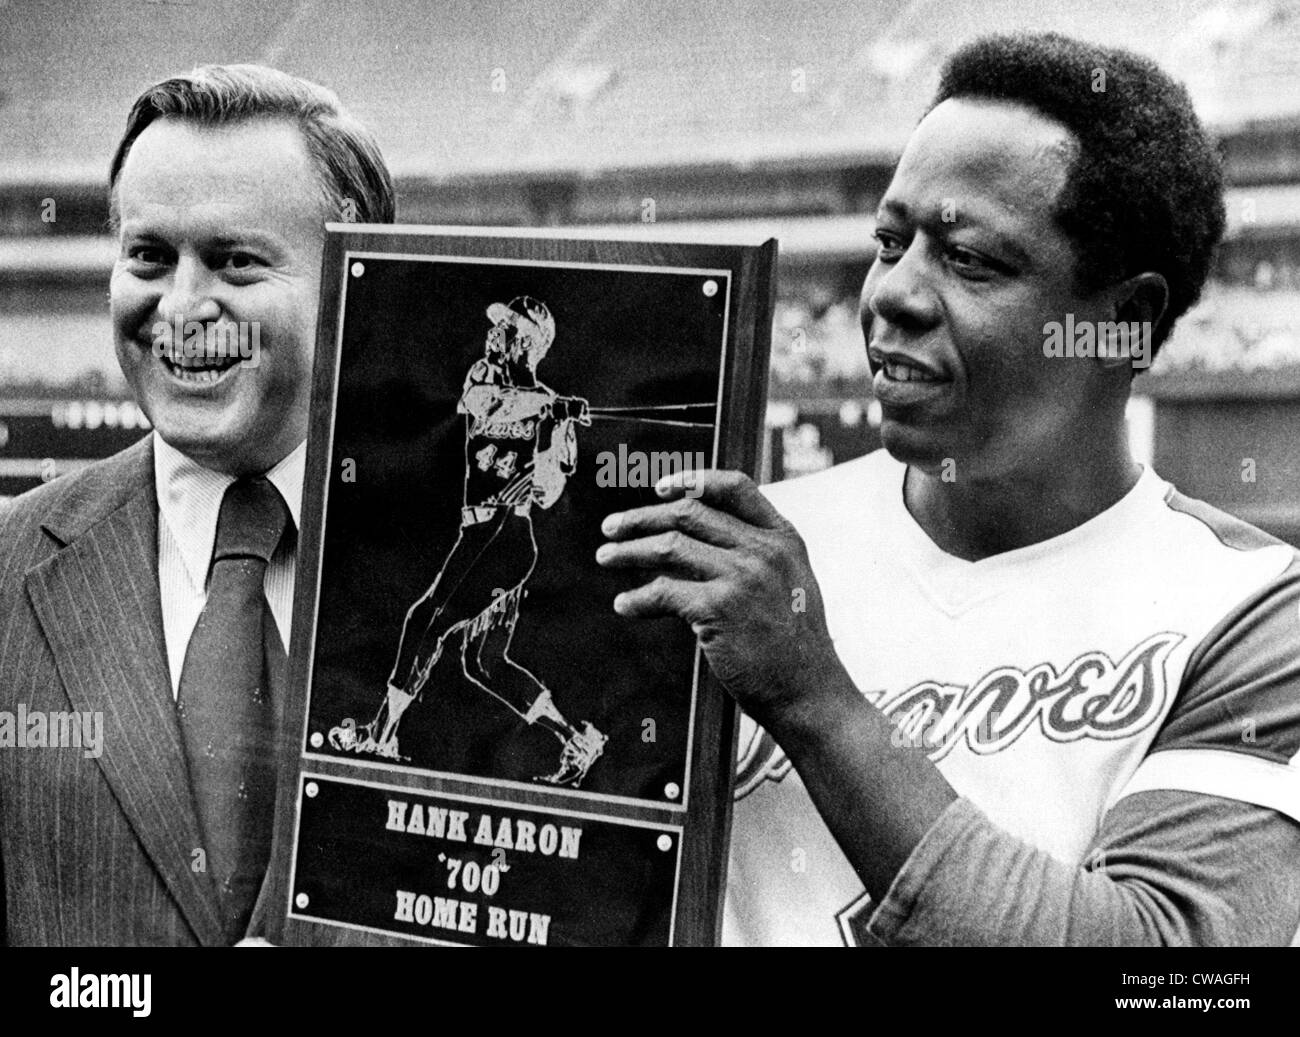 Atlanta Braves president William Bartholomay presents Hank Aaron with the plaque honoring his 700th home run, 1973. Courtesy: Stock Photo